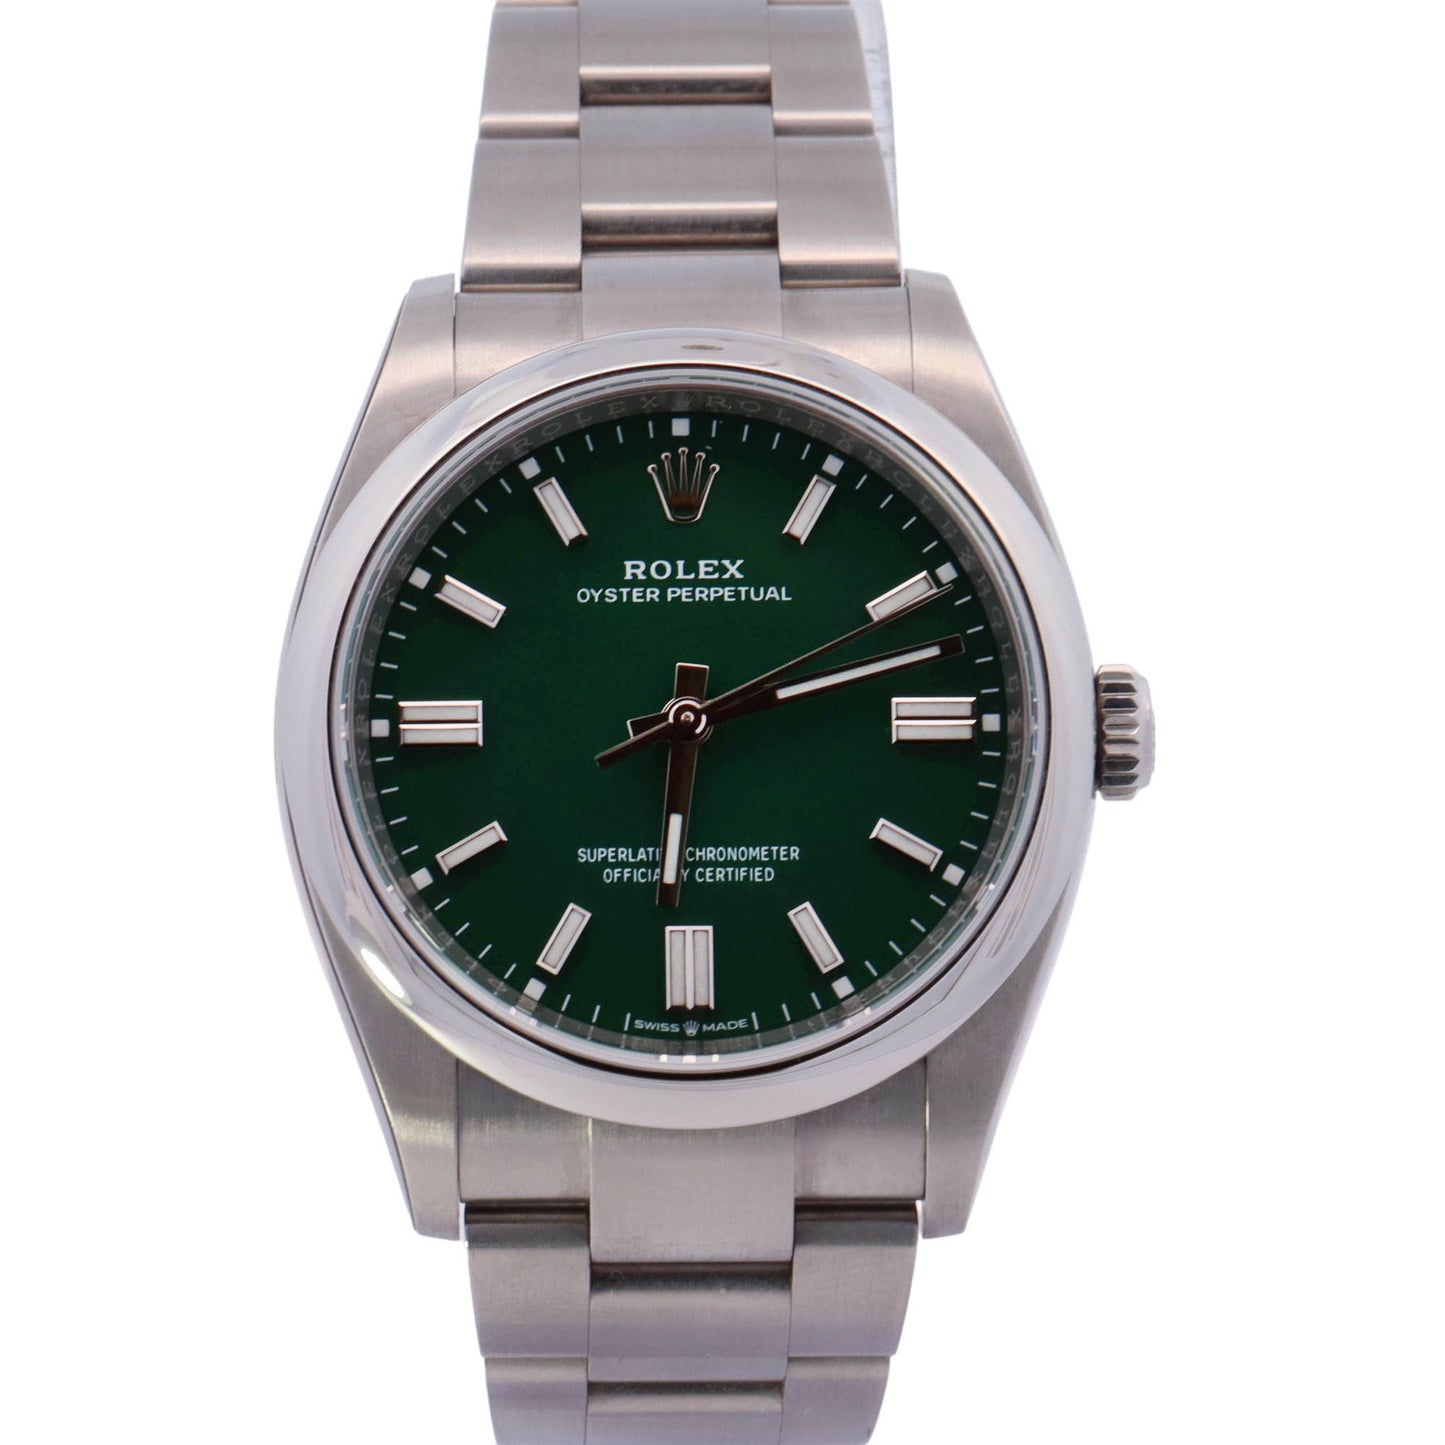 Rolex Oyster Perpetual Stainless Steel 36mm Green Stick Dial Watch Reference# 126000 - Happy Jewelers Fine Jewelry Lifetime Warranty